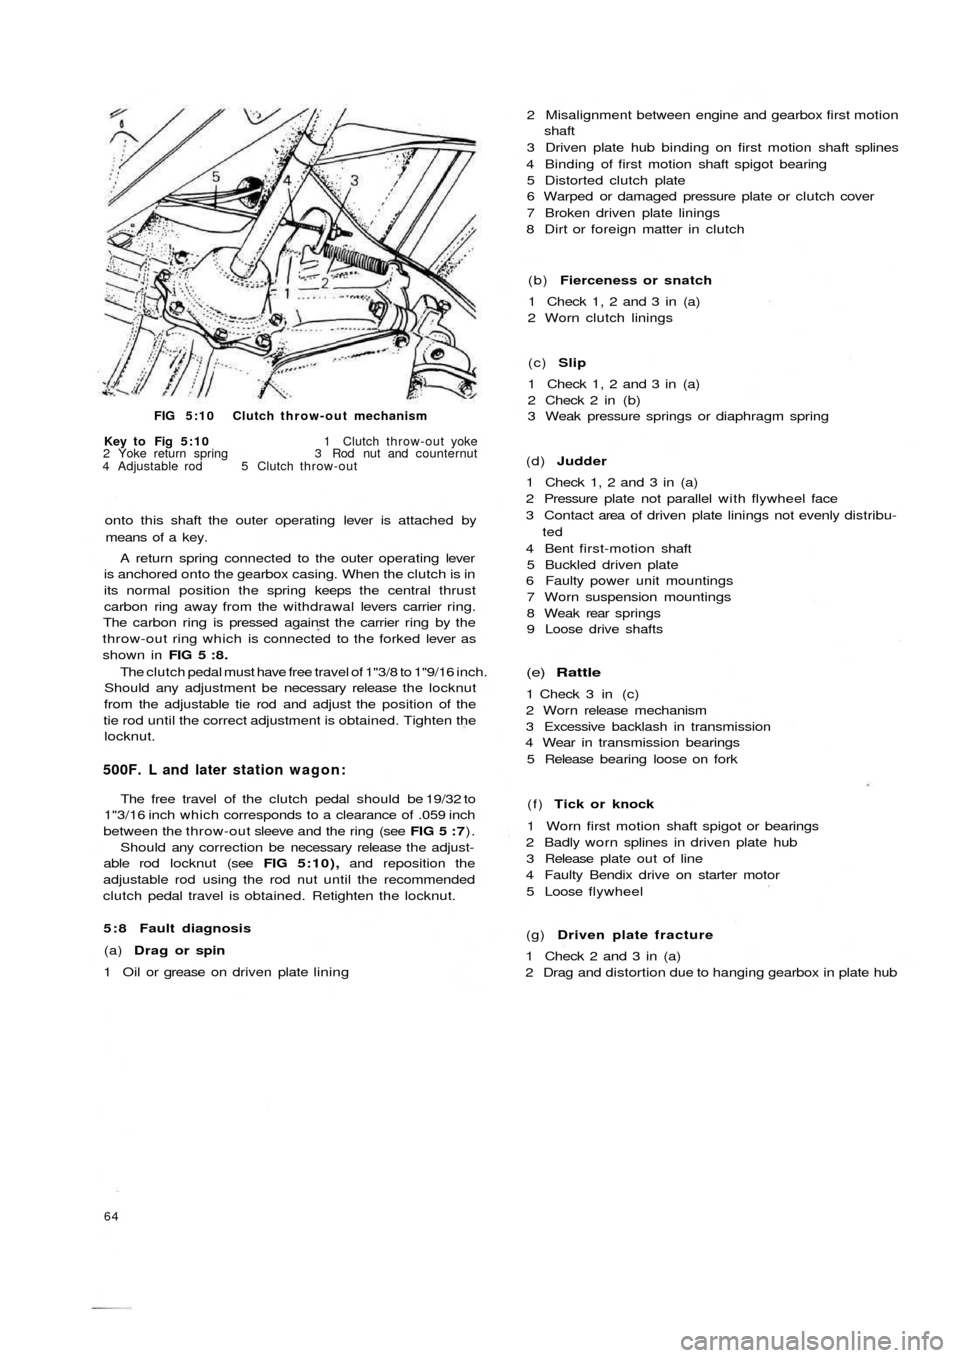 FIAT 500 1970 1.G Workshop Manual FIG 5:10 Clutch throw-out mechanism
Key to  Fig  5:10 1 Clutch throw-out yoke
2 Yoke return spring 3 Rod nut and counternut
4 Adjustable rod  5  Clutch throw-out
onto this shaft the outer operating le